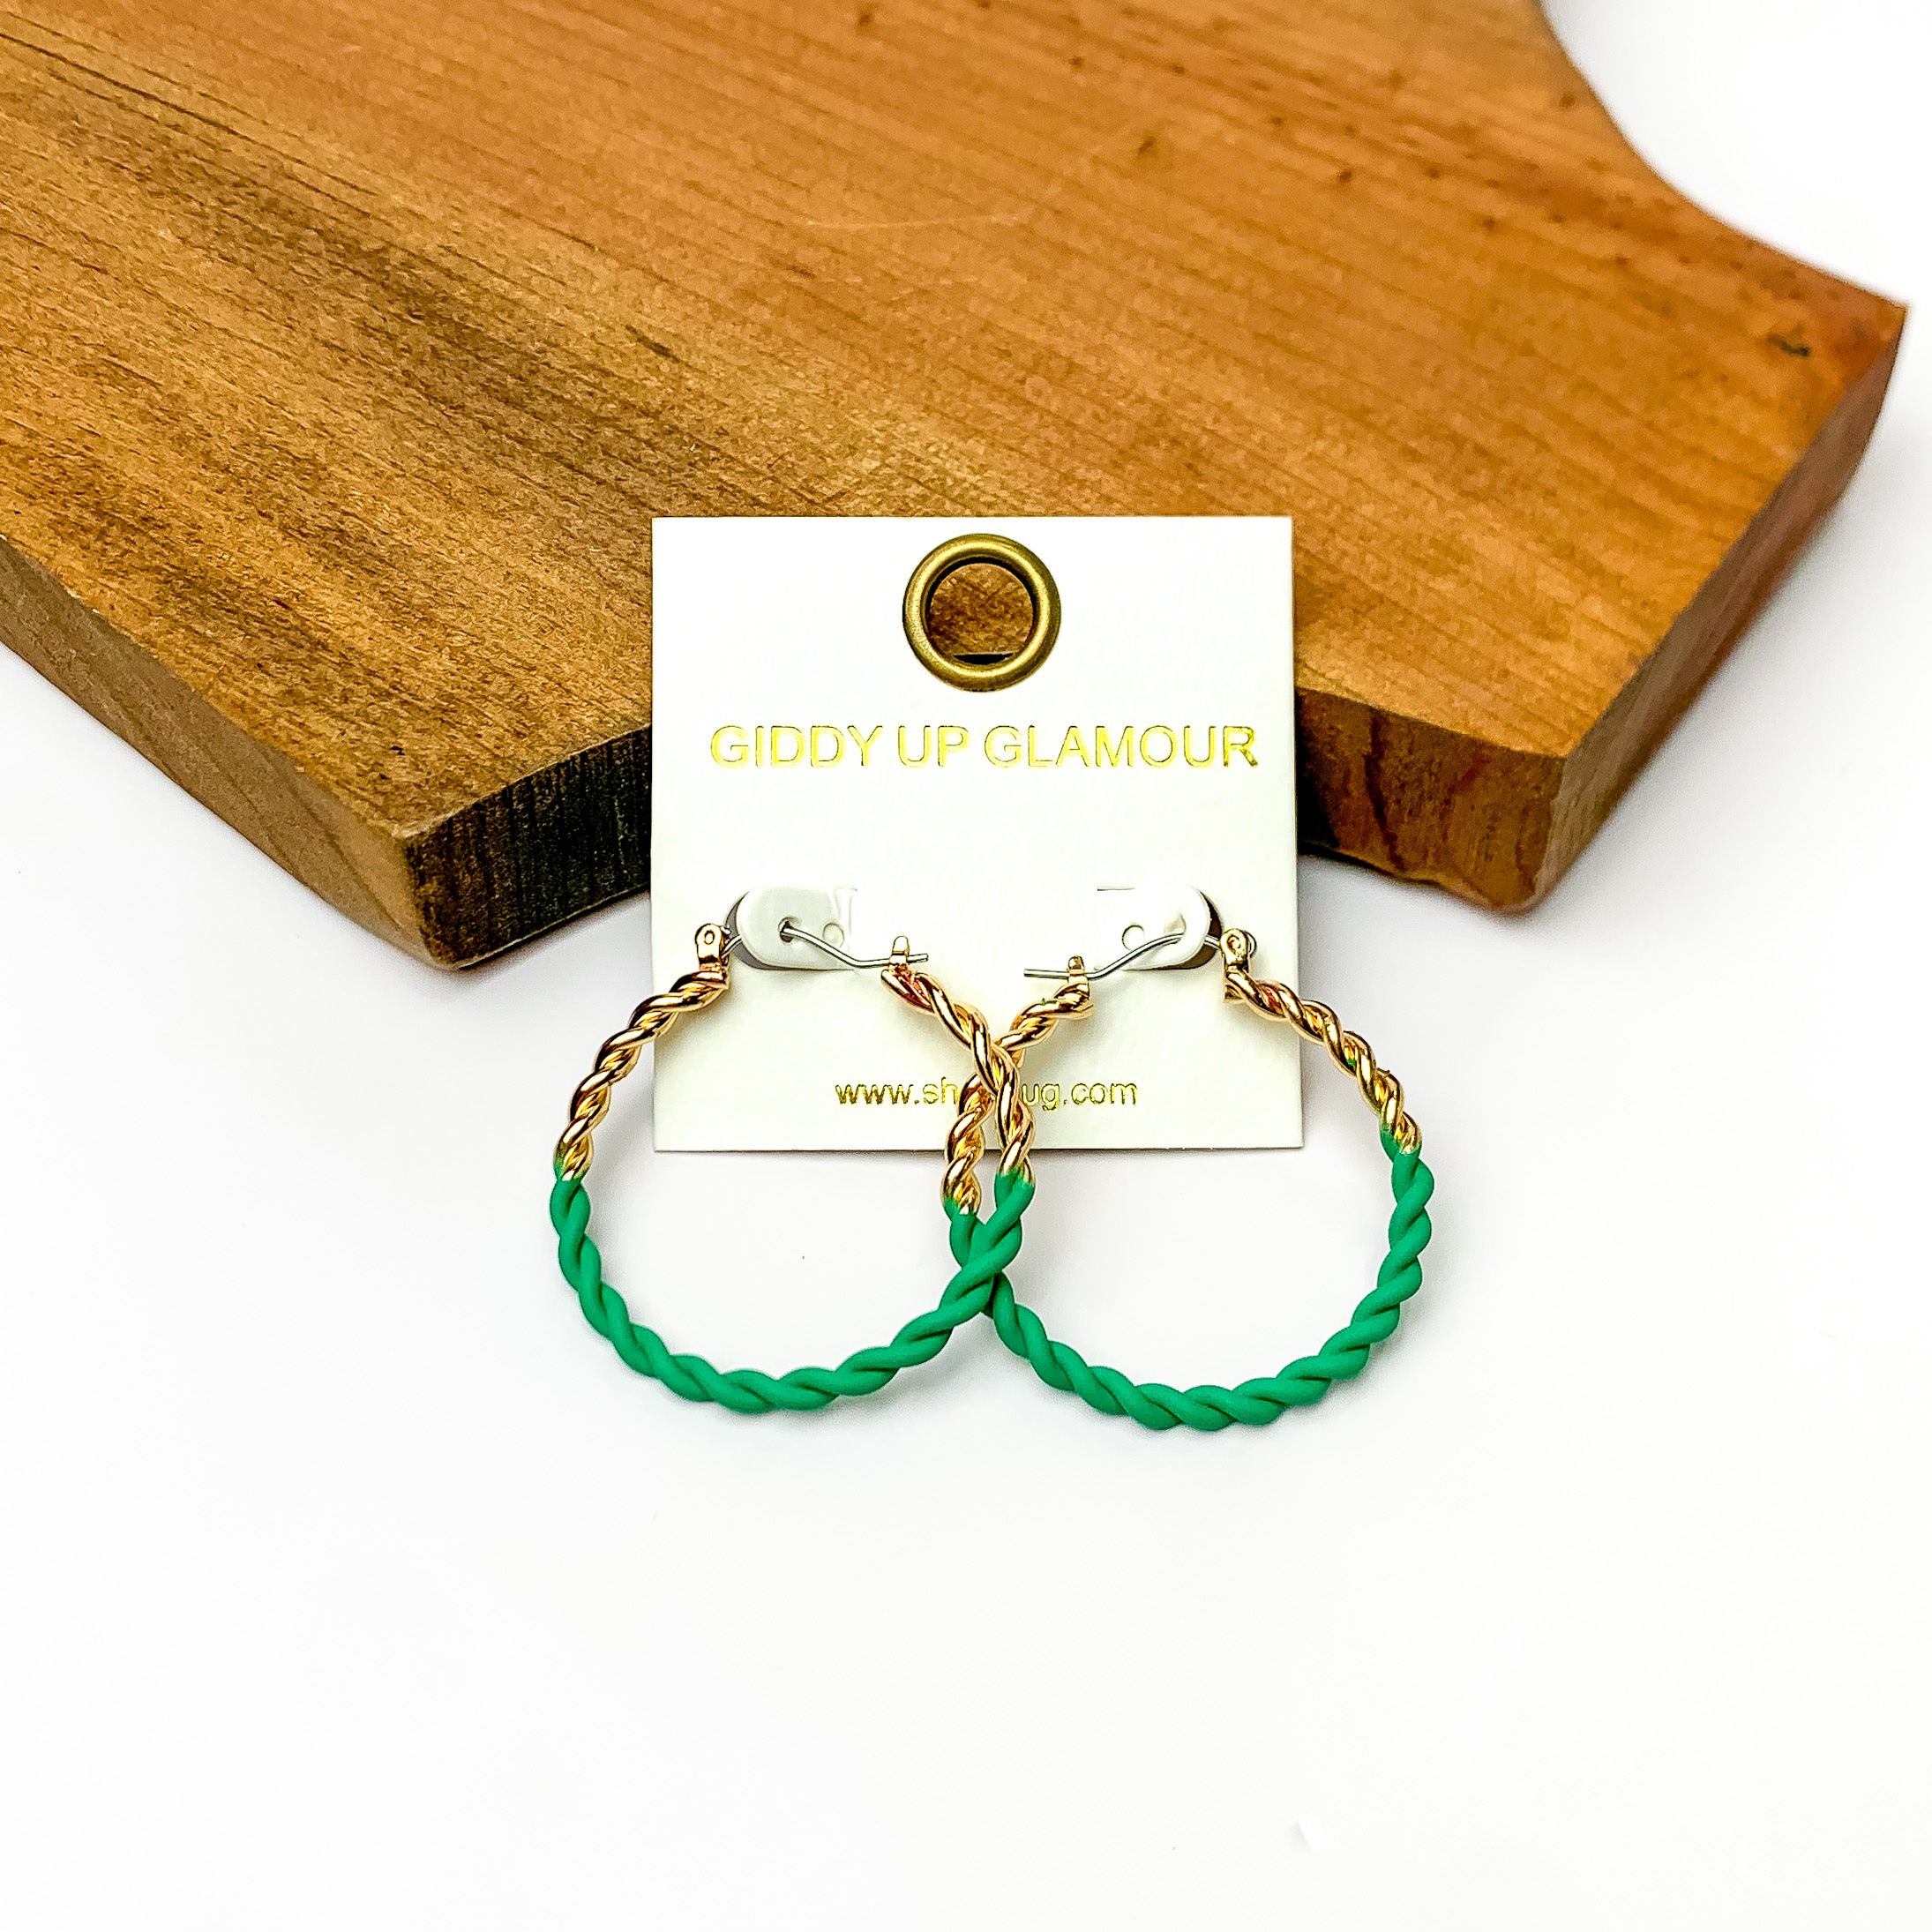 Twisted Gold Tone Hoop Earrings in Green. Pictured on a white background with a wood piece behind.